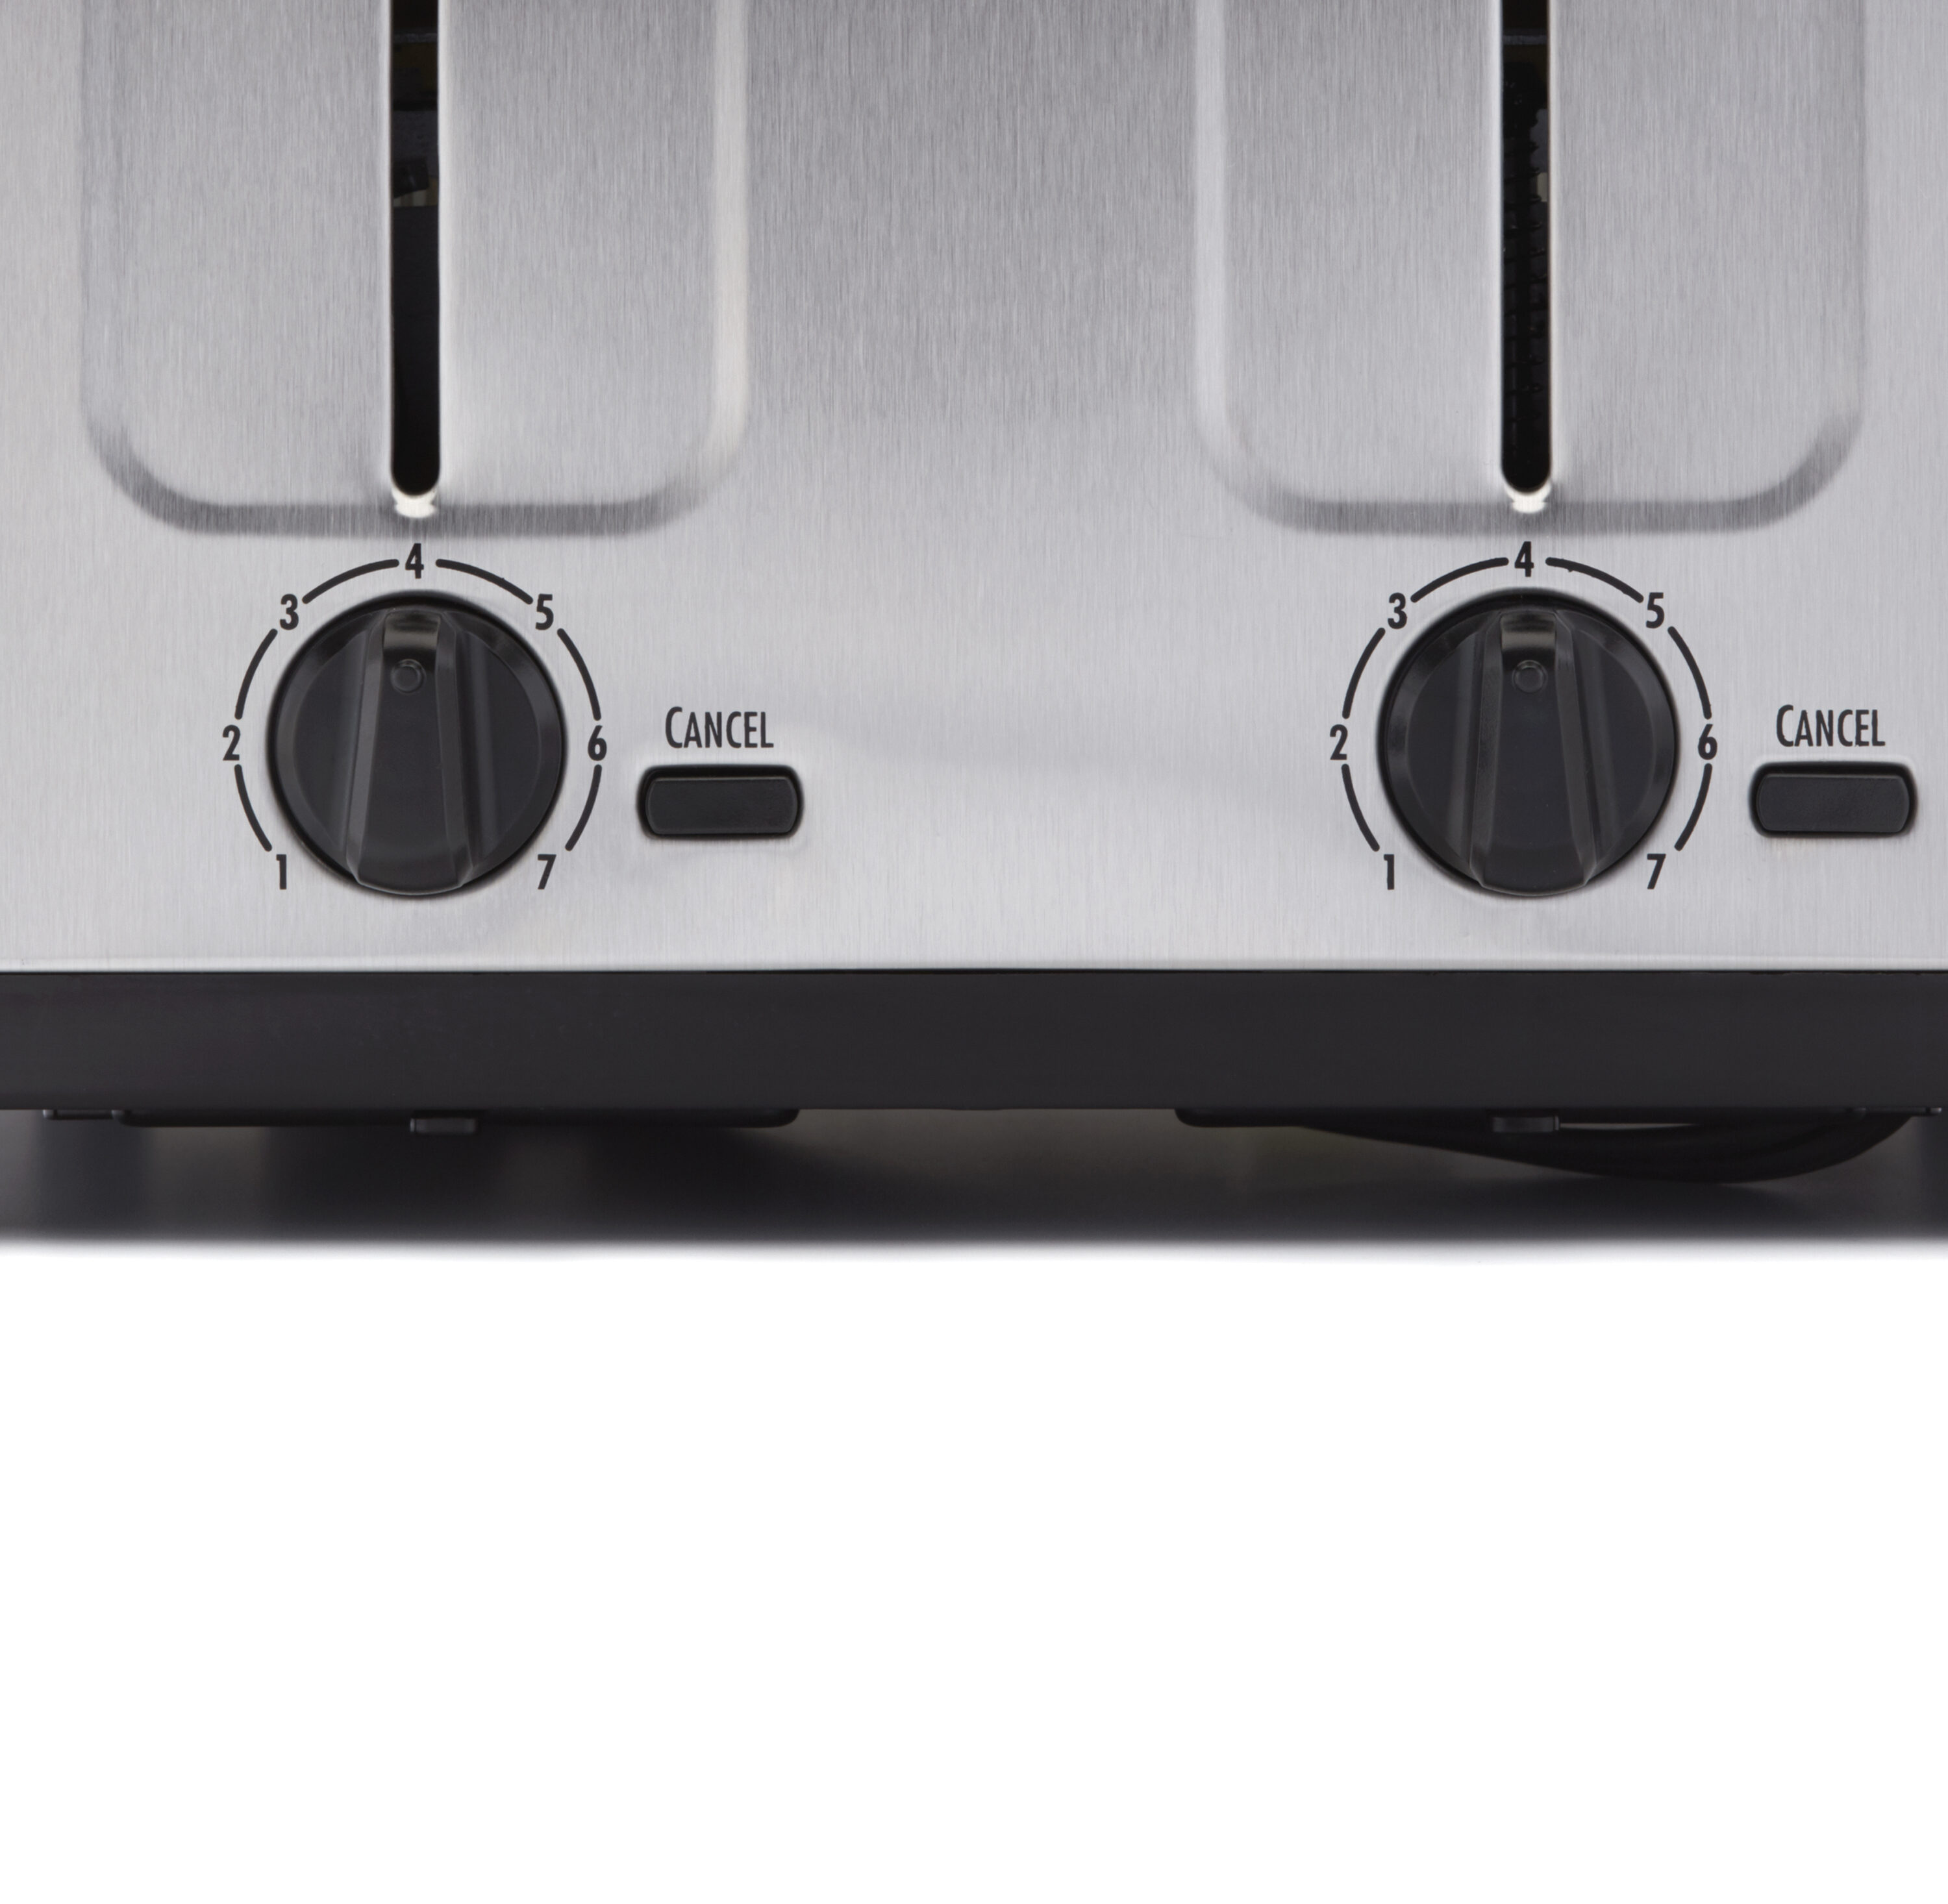 Hamilton Beach 2-Slice Brushed Metal Toaster With Extra-Wide Slots